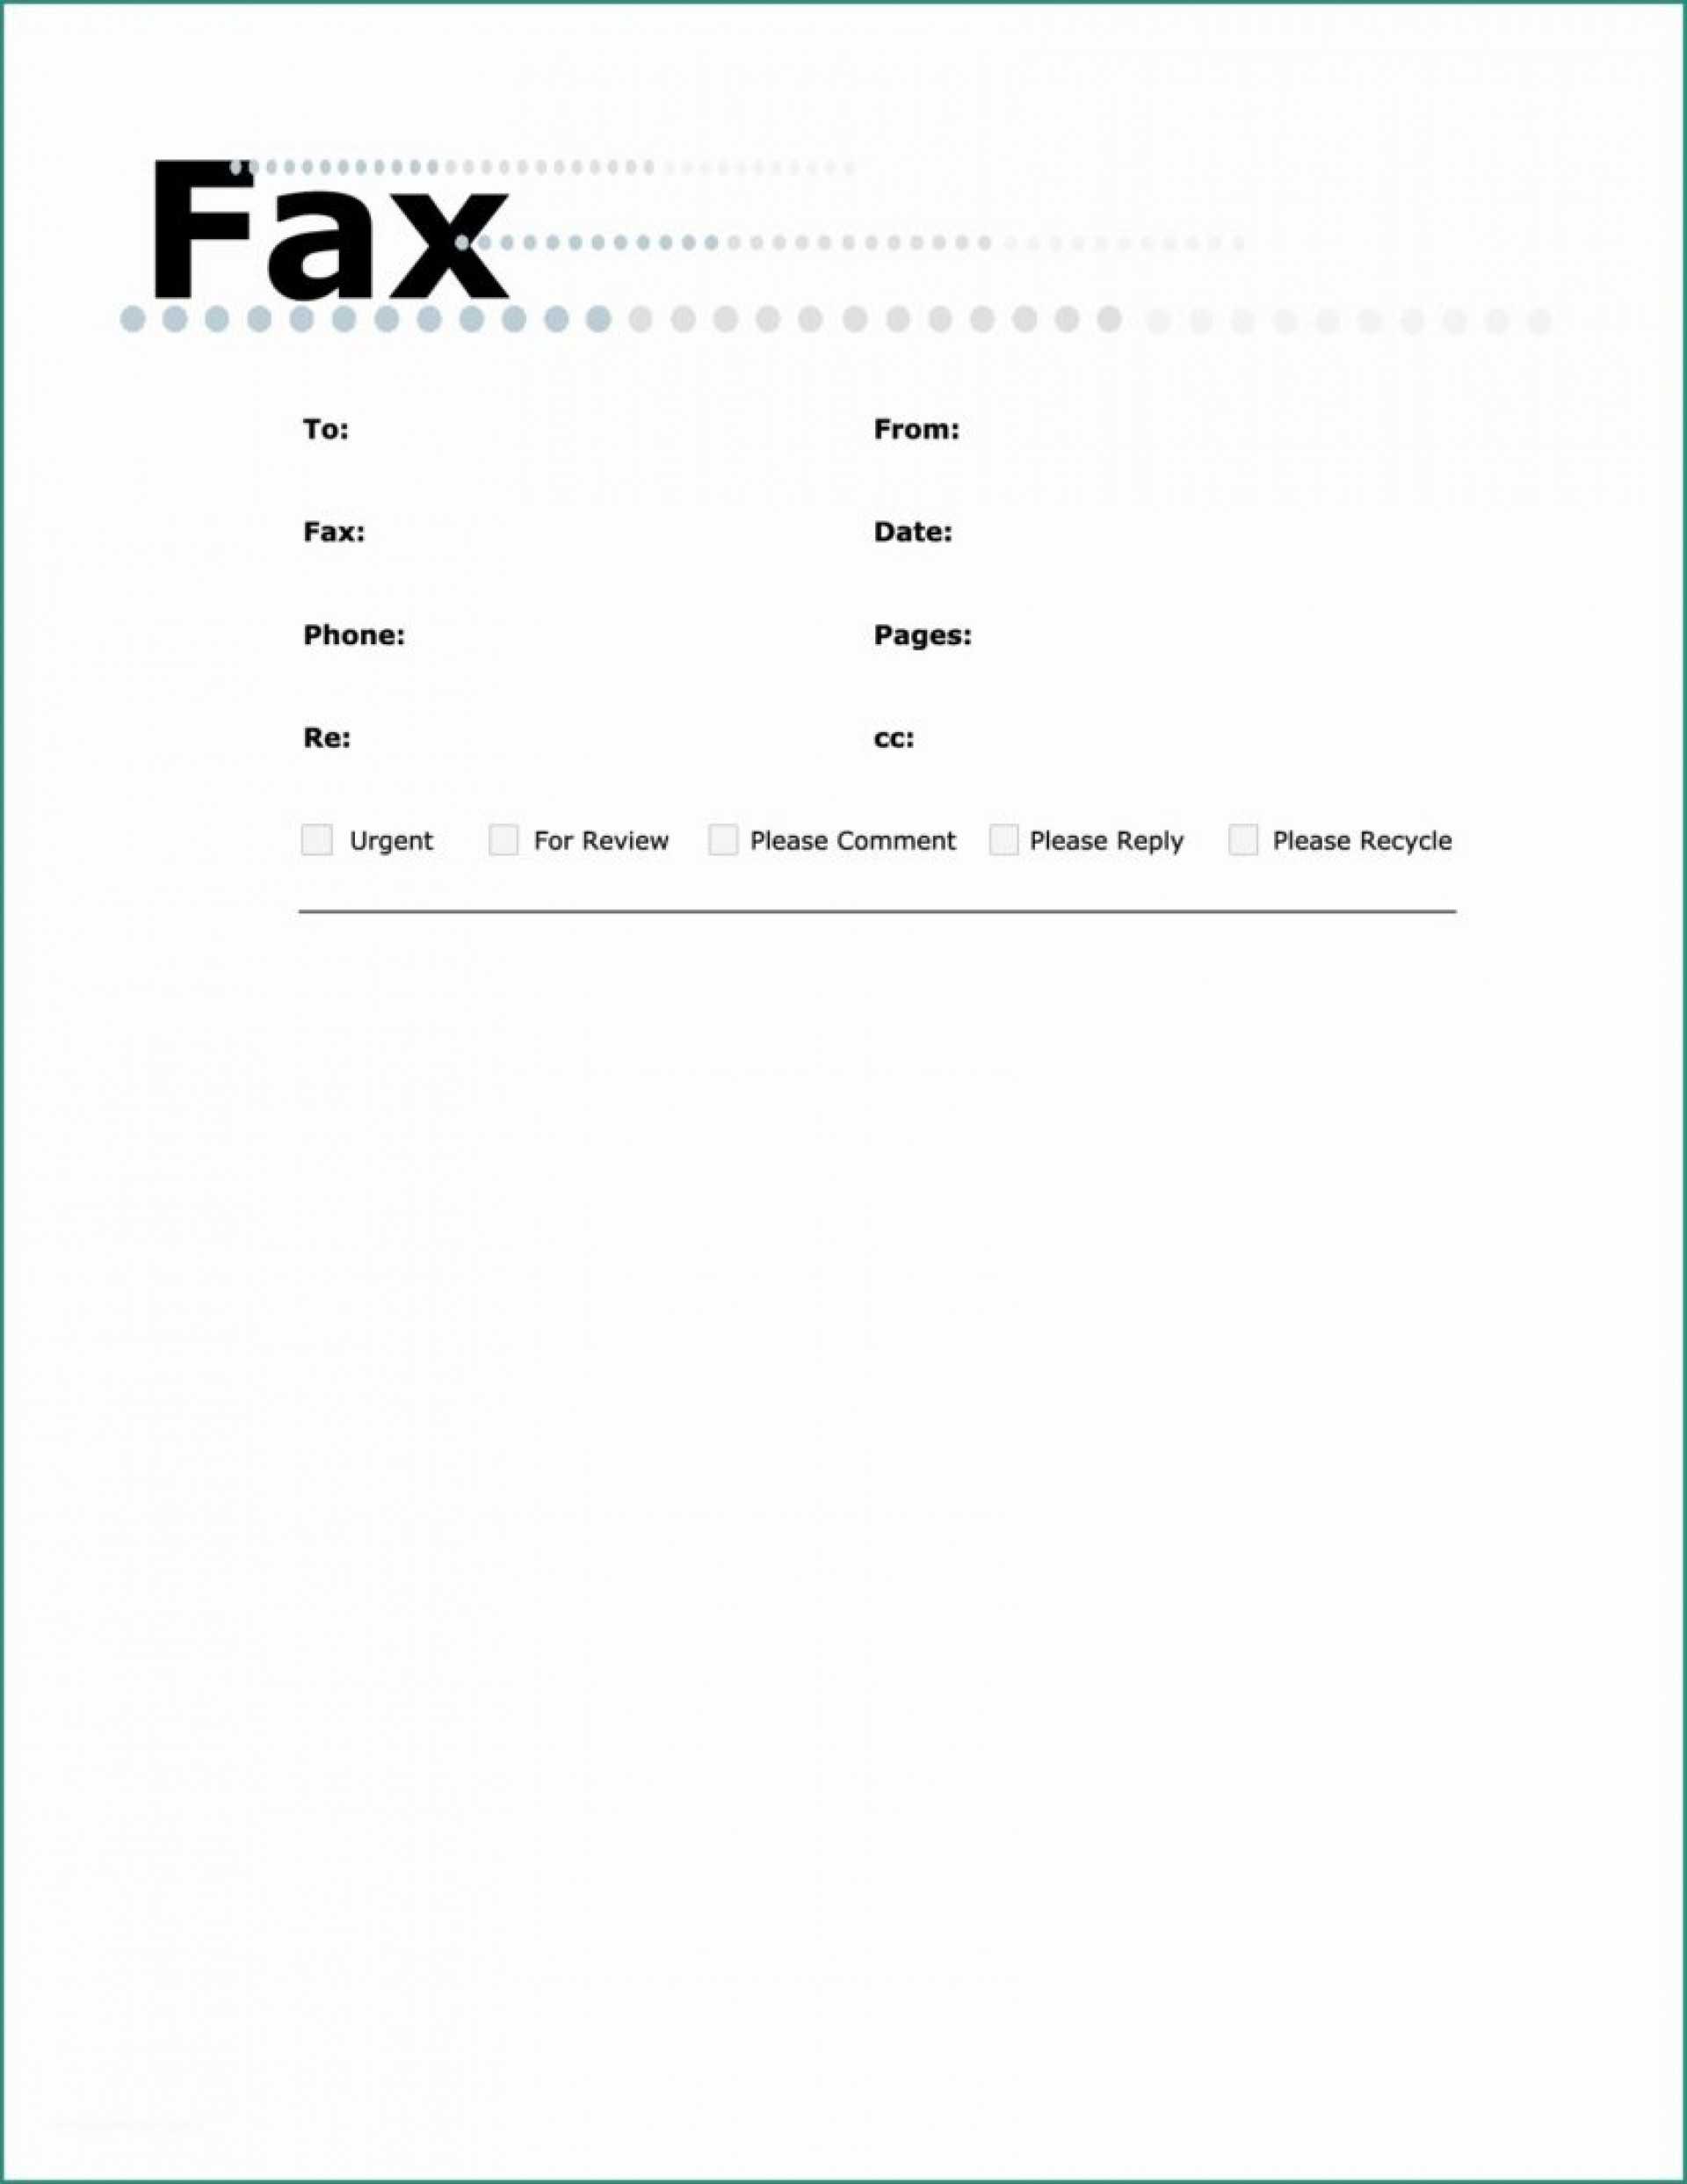 Basic Fax Cover Sheet Sample Pdf Free – Howwikipediaworks Intended For Fax Cover Sheet Template Word 2010